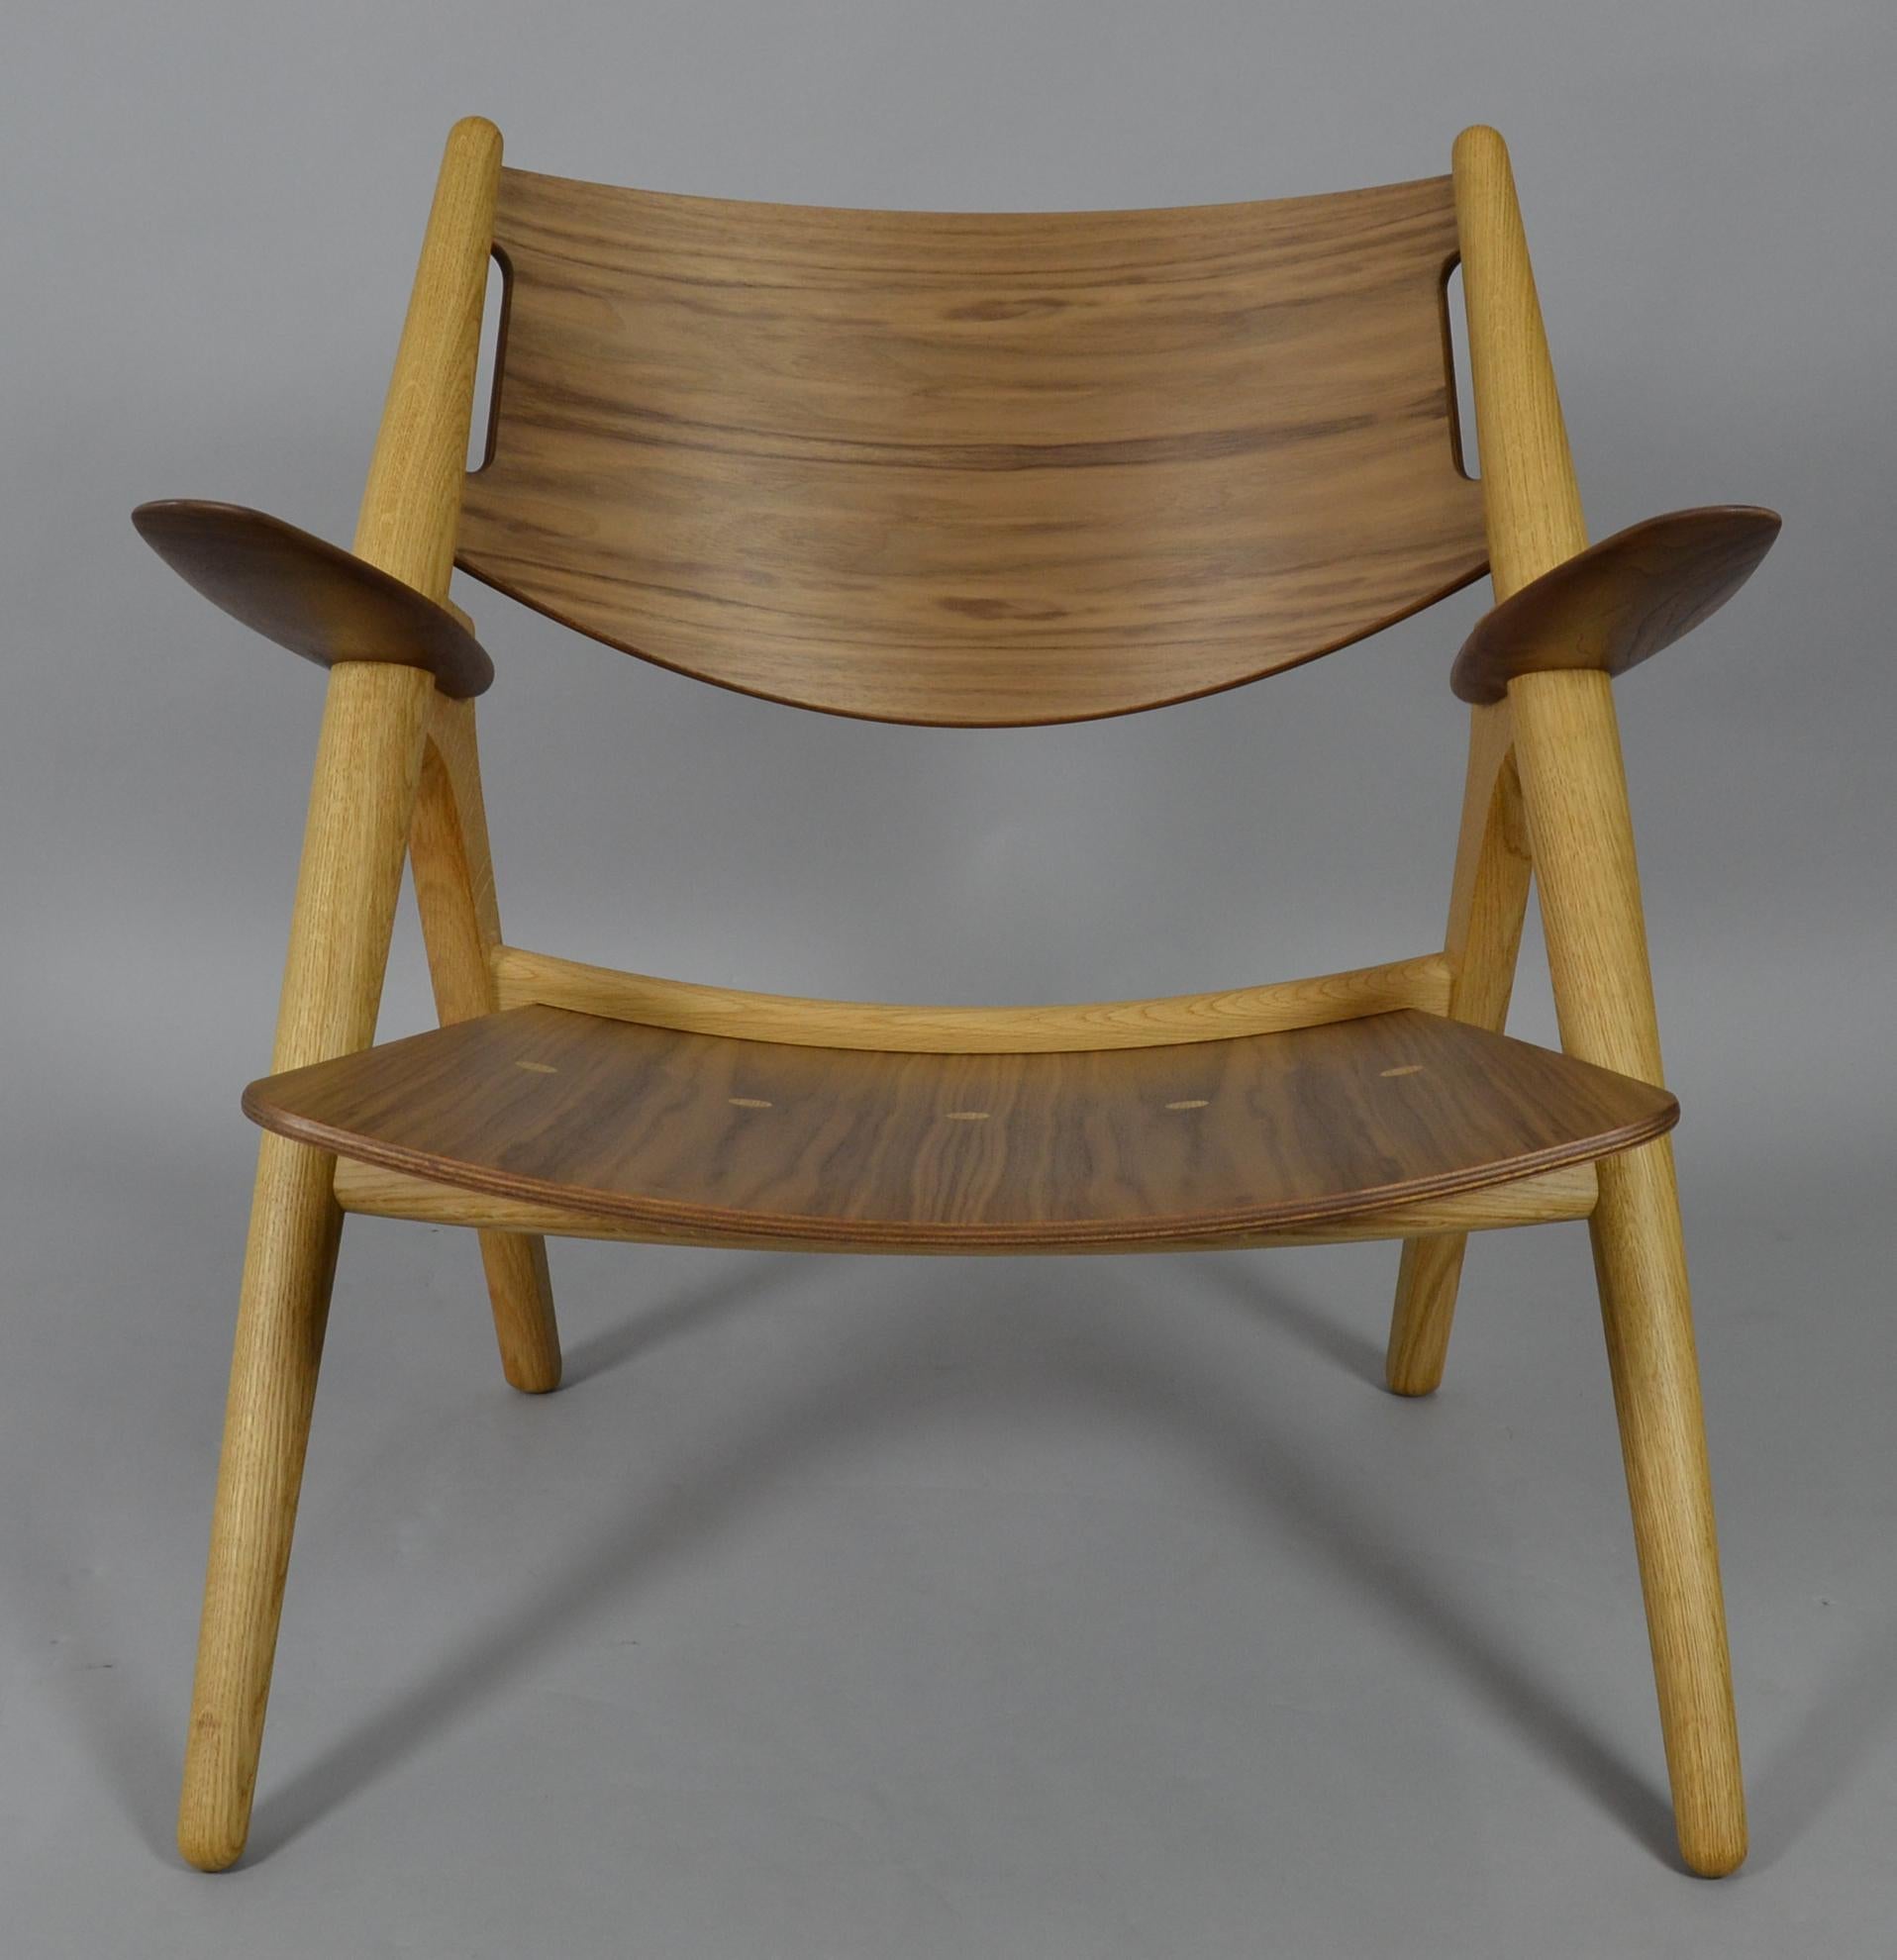 Design: Hans J. Wegner from 1951
Manufacturer: Carl Hansen
Model: CH28
Frame oak, seat back and armrests oiled in walnut.
This chair has never been used and is like new.
Hans J. Wegner (1914-2007) is one of the most famous Danish designers.
He